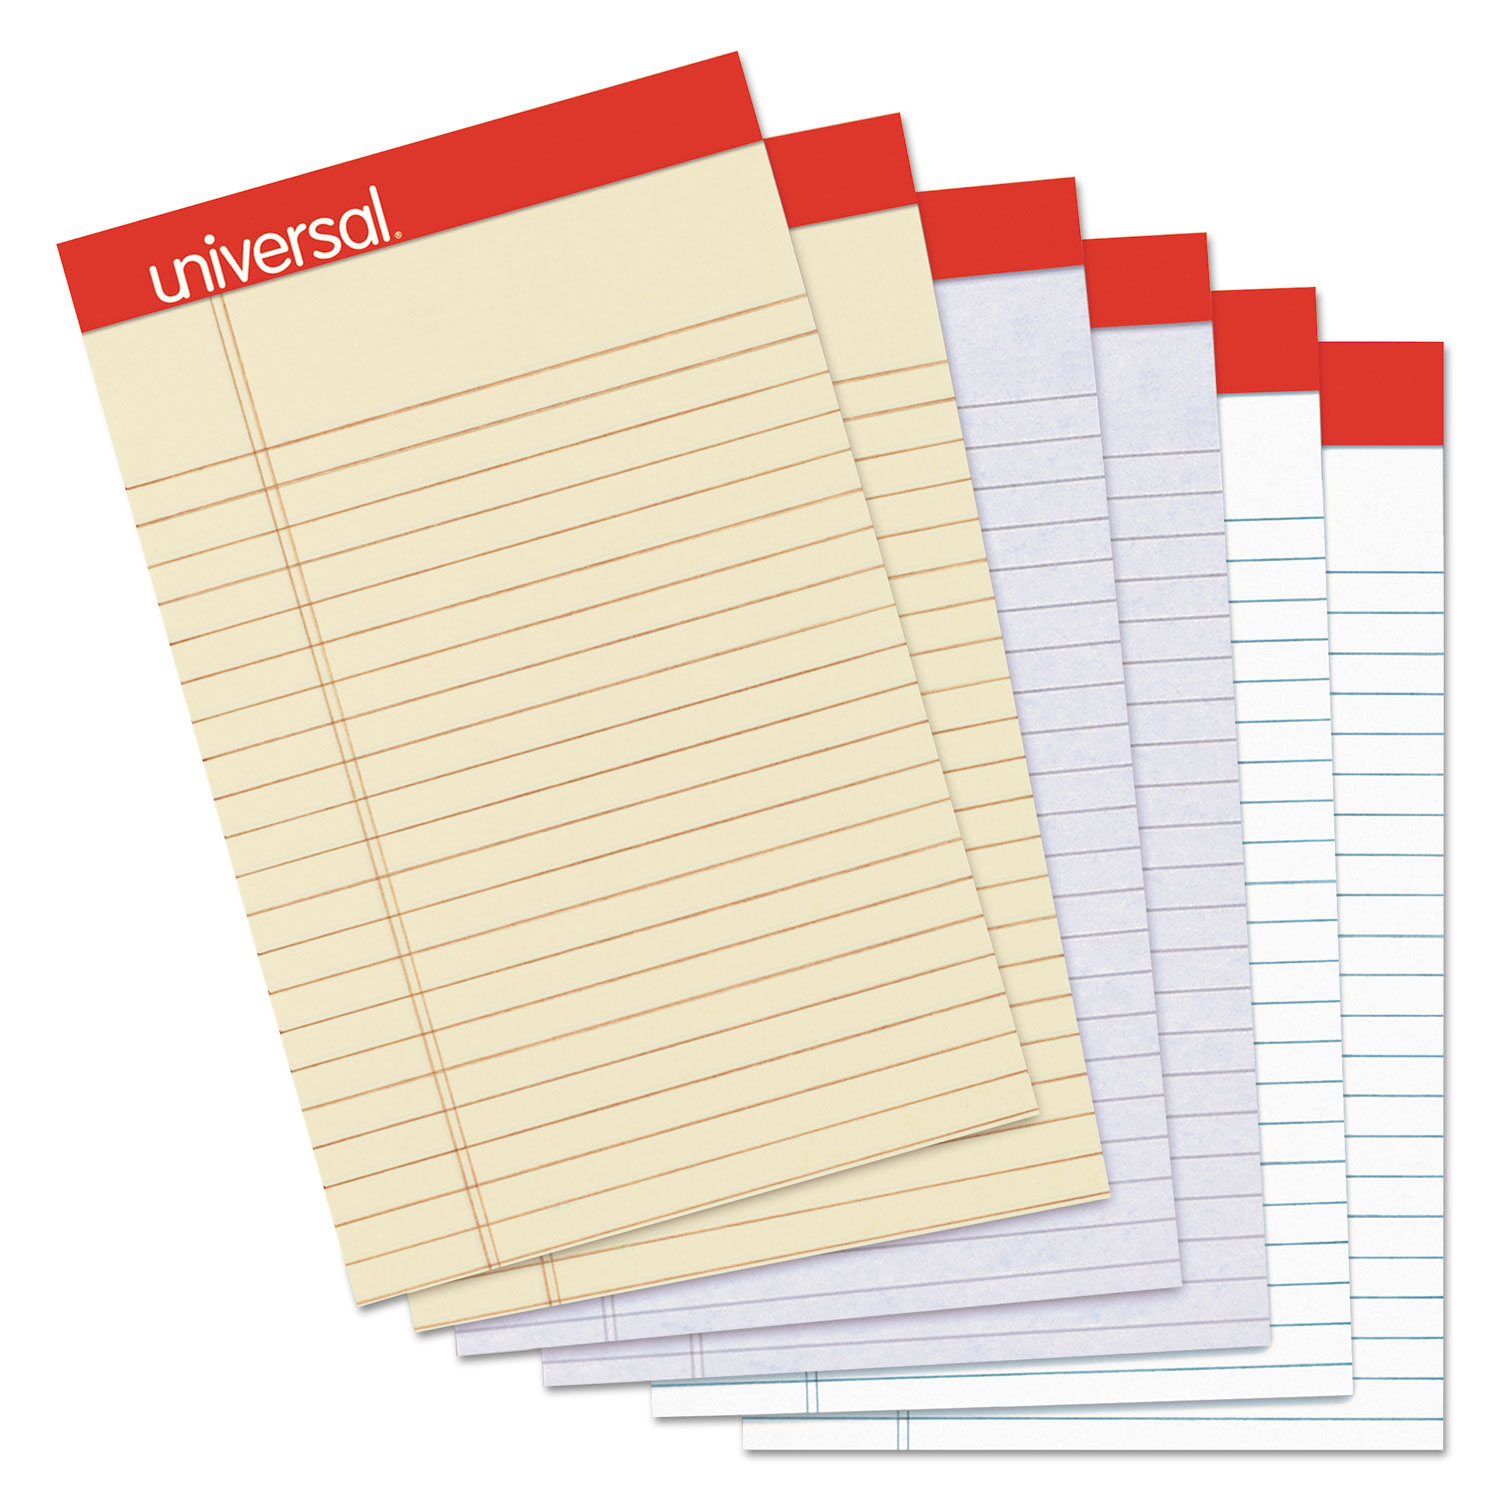  Universal UNV35895 Colored Perforated Writing Pads, Narrow Rule, 5 x 8, Assorted Sheet Colors, 50 Sheets, 6/Pack (UNV35895) 